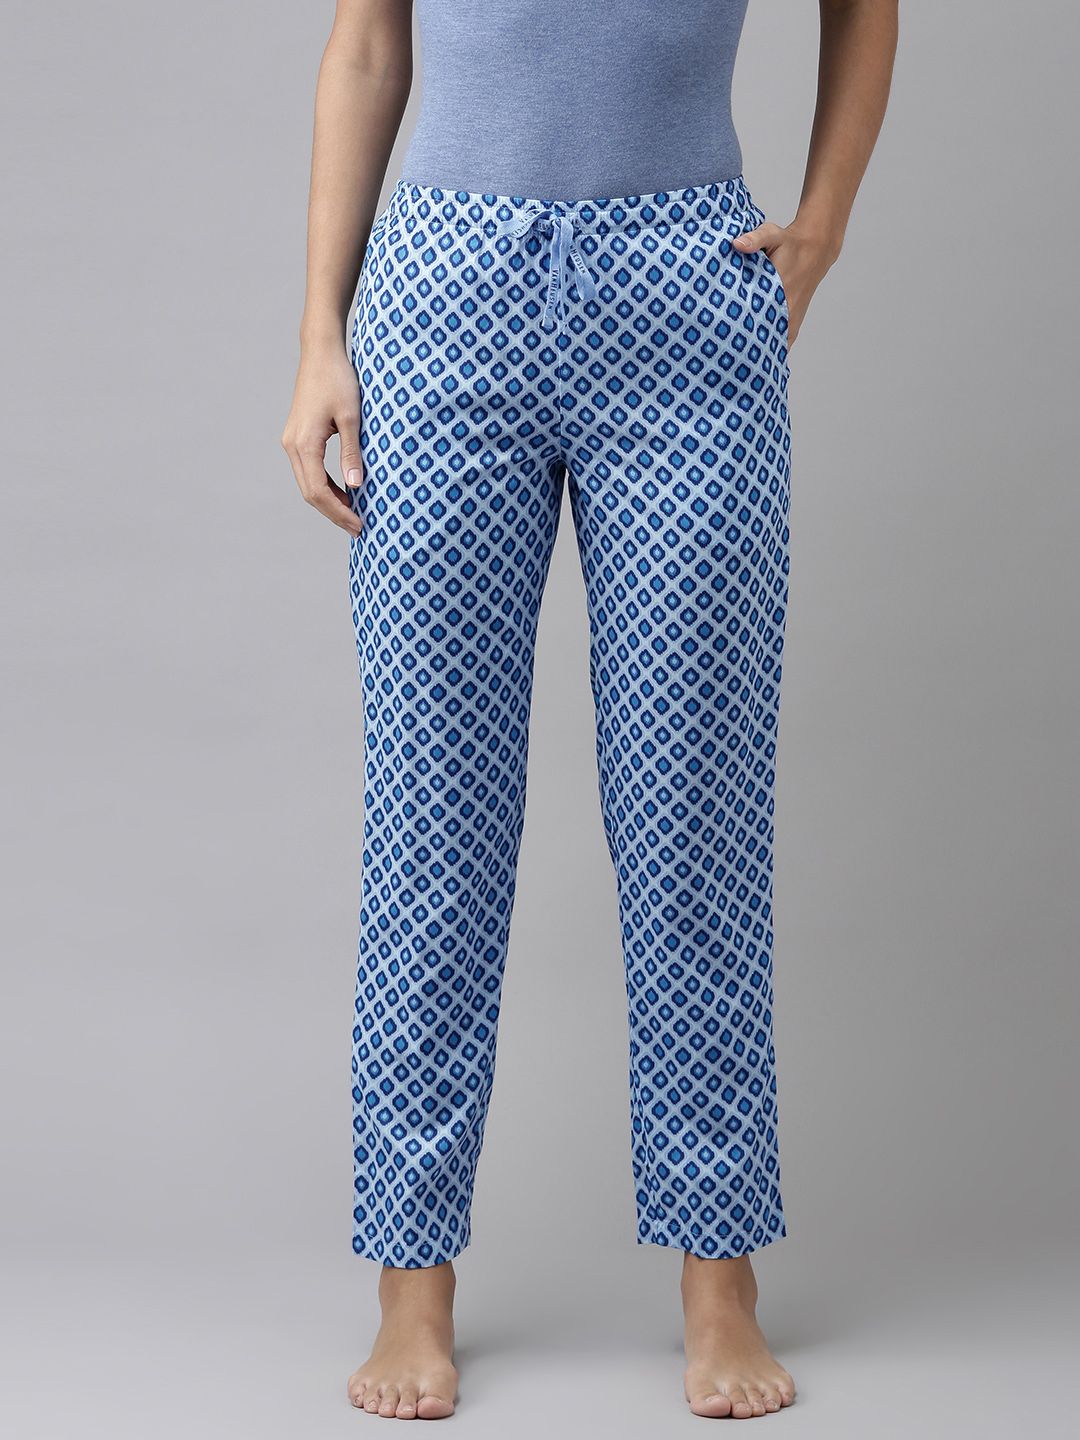 Van Heusen Women Blue and White Printed Lounge Pants Price in India